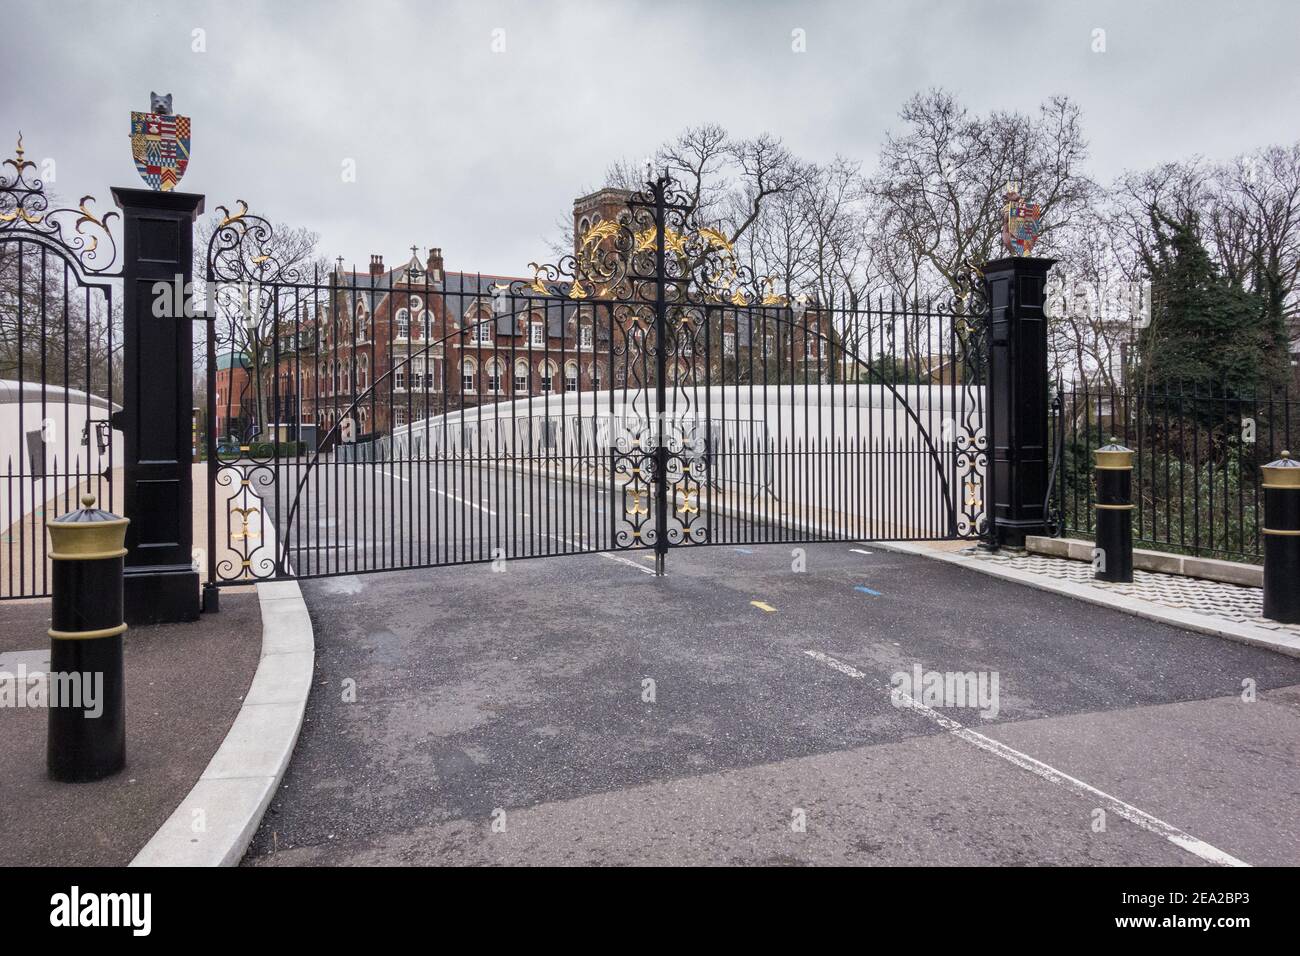 The entrance and gates to Emanuel School, Battersea Rise, London, SW11, U.K. Stock Photo